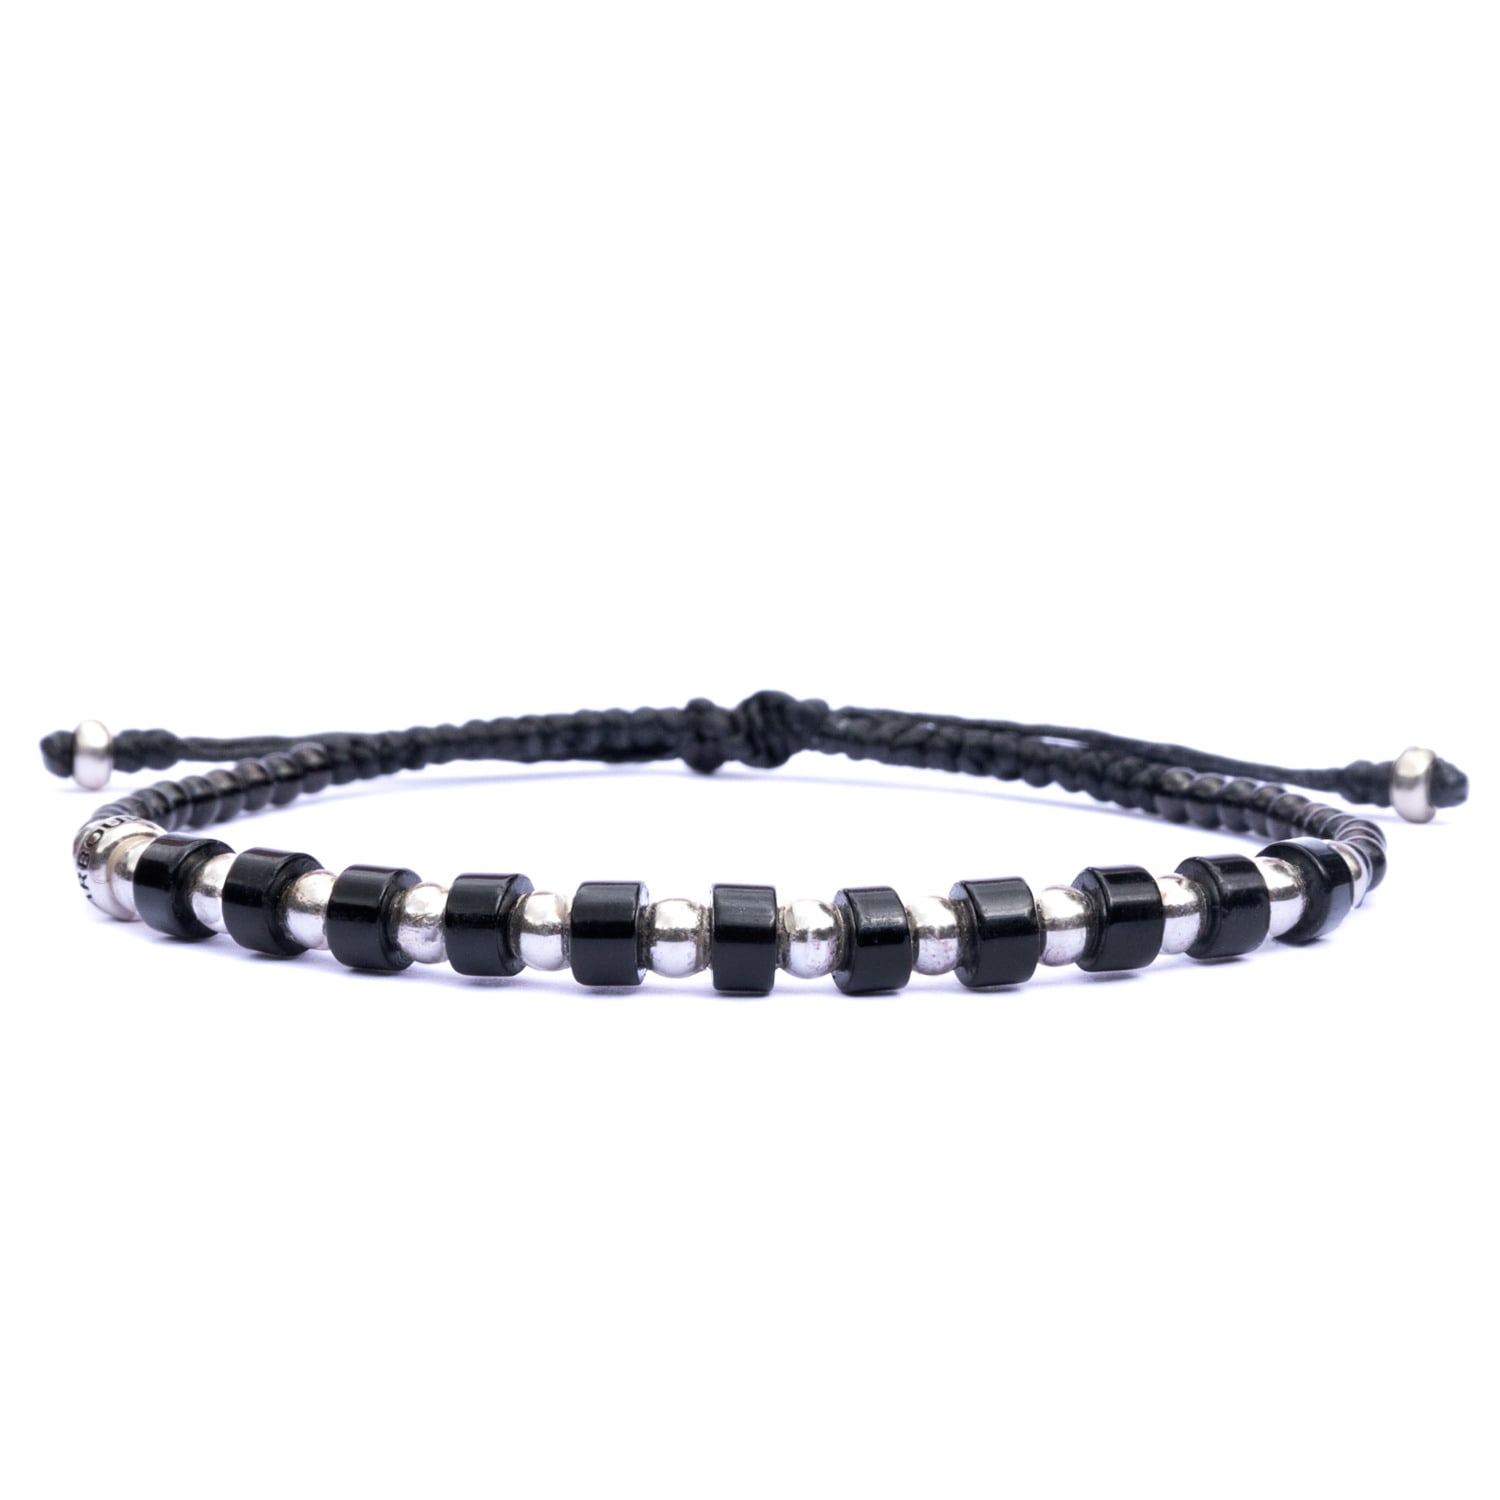 Men's Handmade Black Onyx Stone And Silver Rope Bracelet With Steel Accents - Onyx Gaia - Black Harbour UK Bracelets